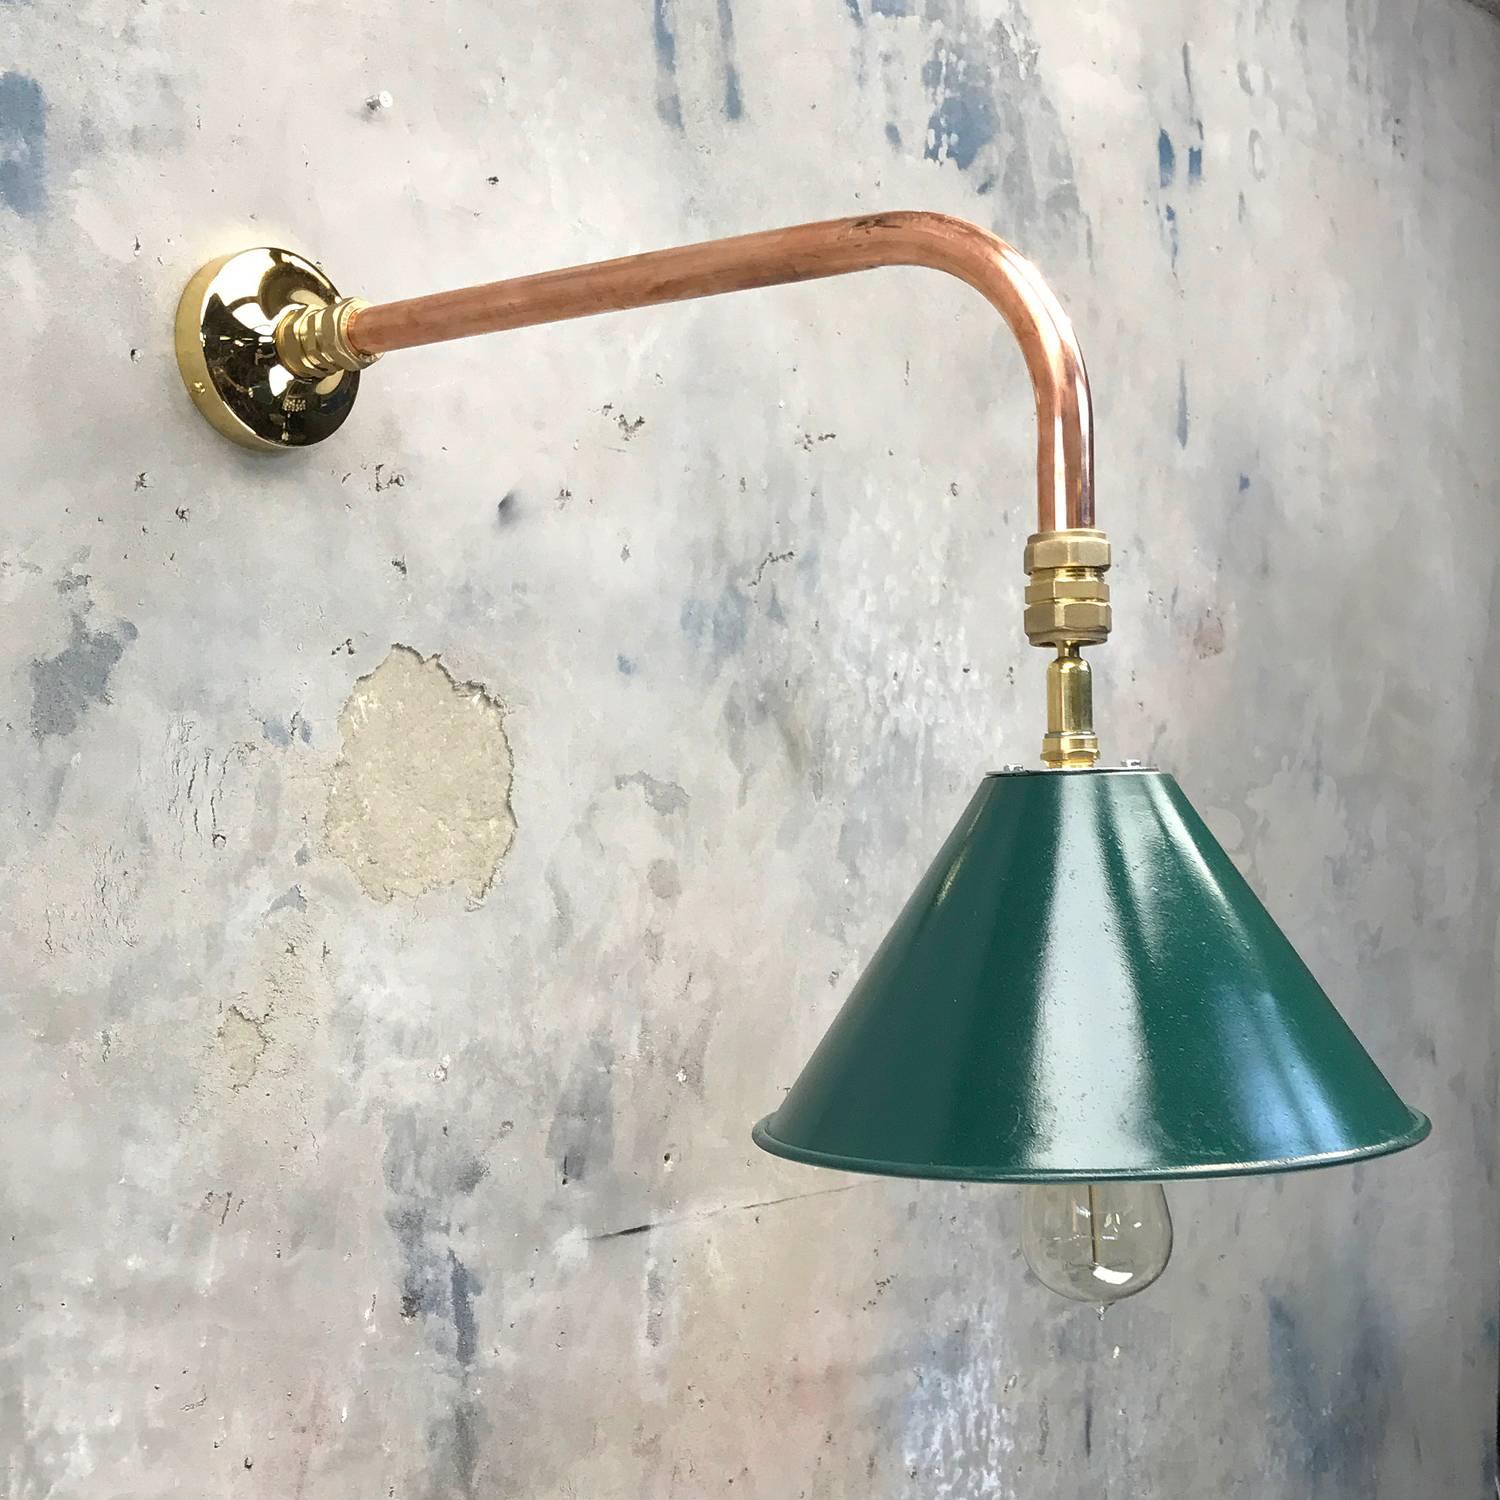 A reclaimed army green color shade reclaimed from the British army where they where used as festoon shades in there hundreds.

Loomlight have fabricated a copper and brass cantilever wall mount where the shade can be tilted at any angle for